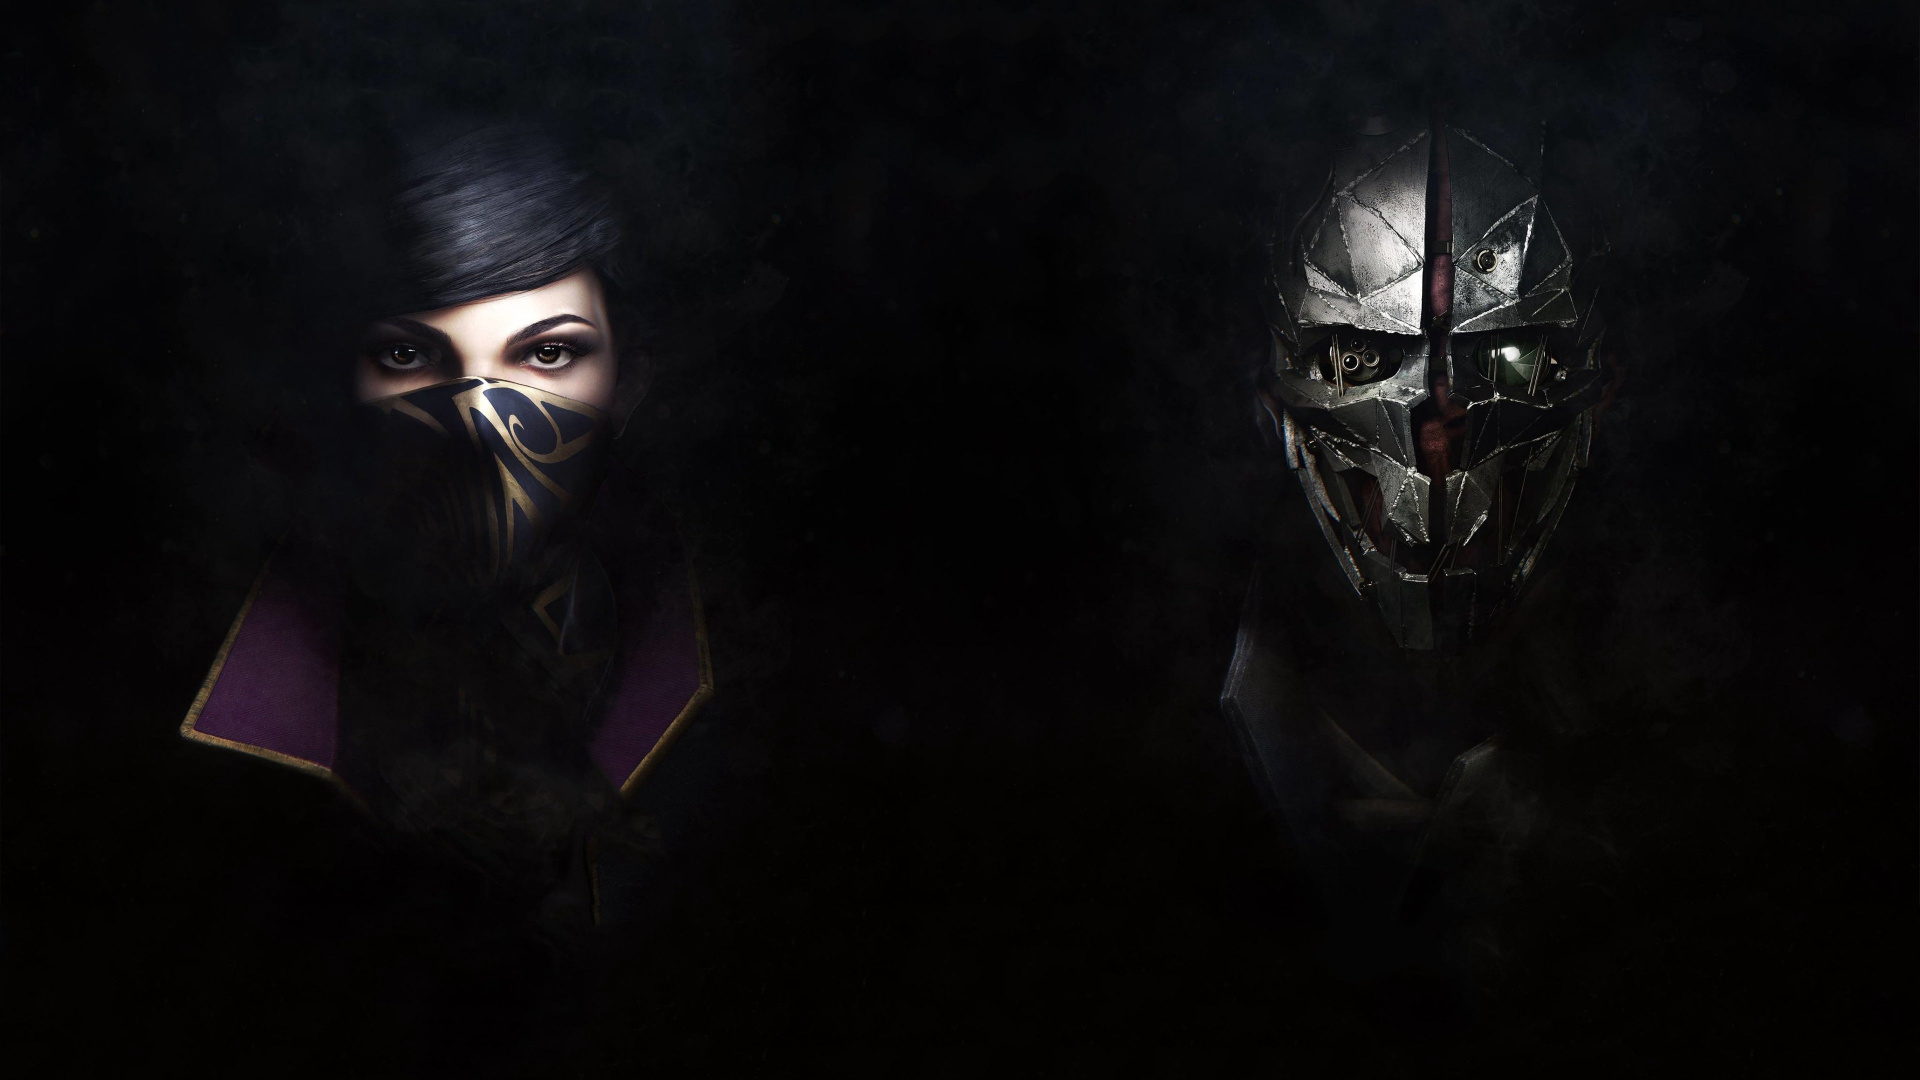 Dishonored 2, Dishonored, Bethesda Softworks, Stealth Game, Darkness. Wallpaper in 1920x1080 Resolution